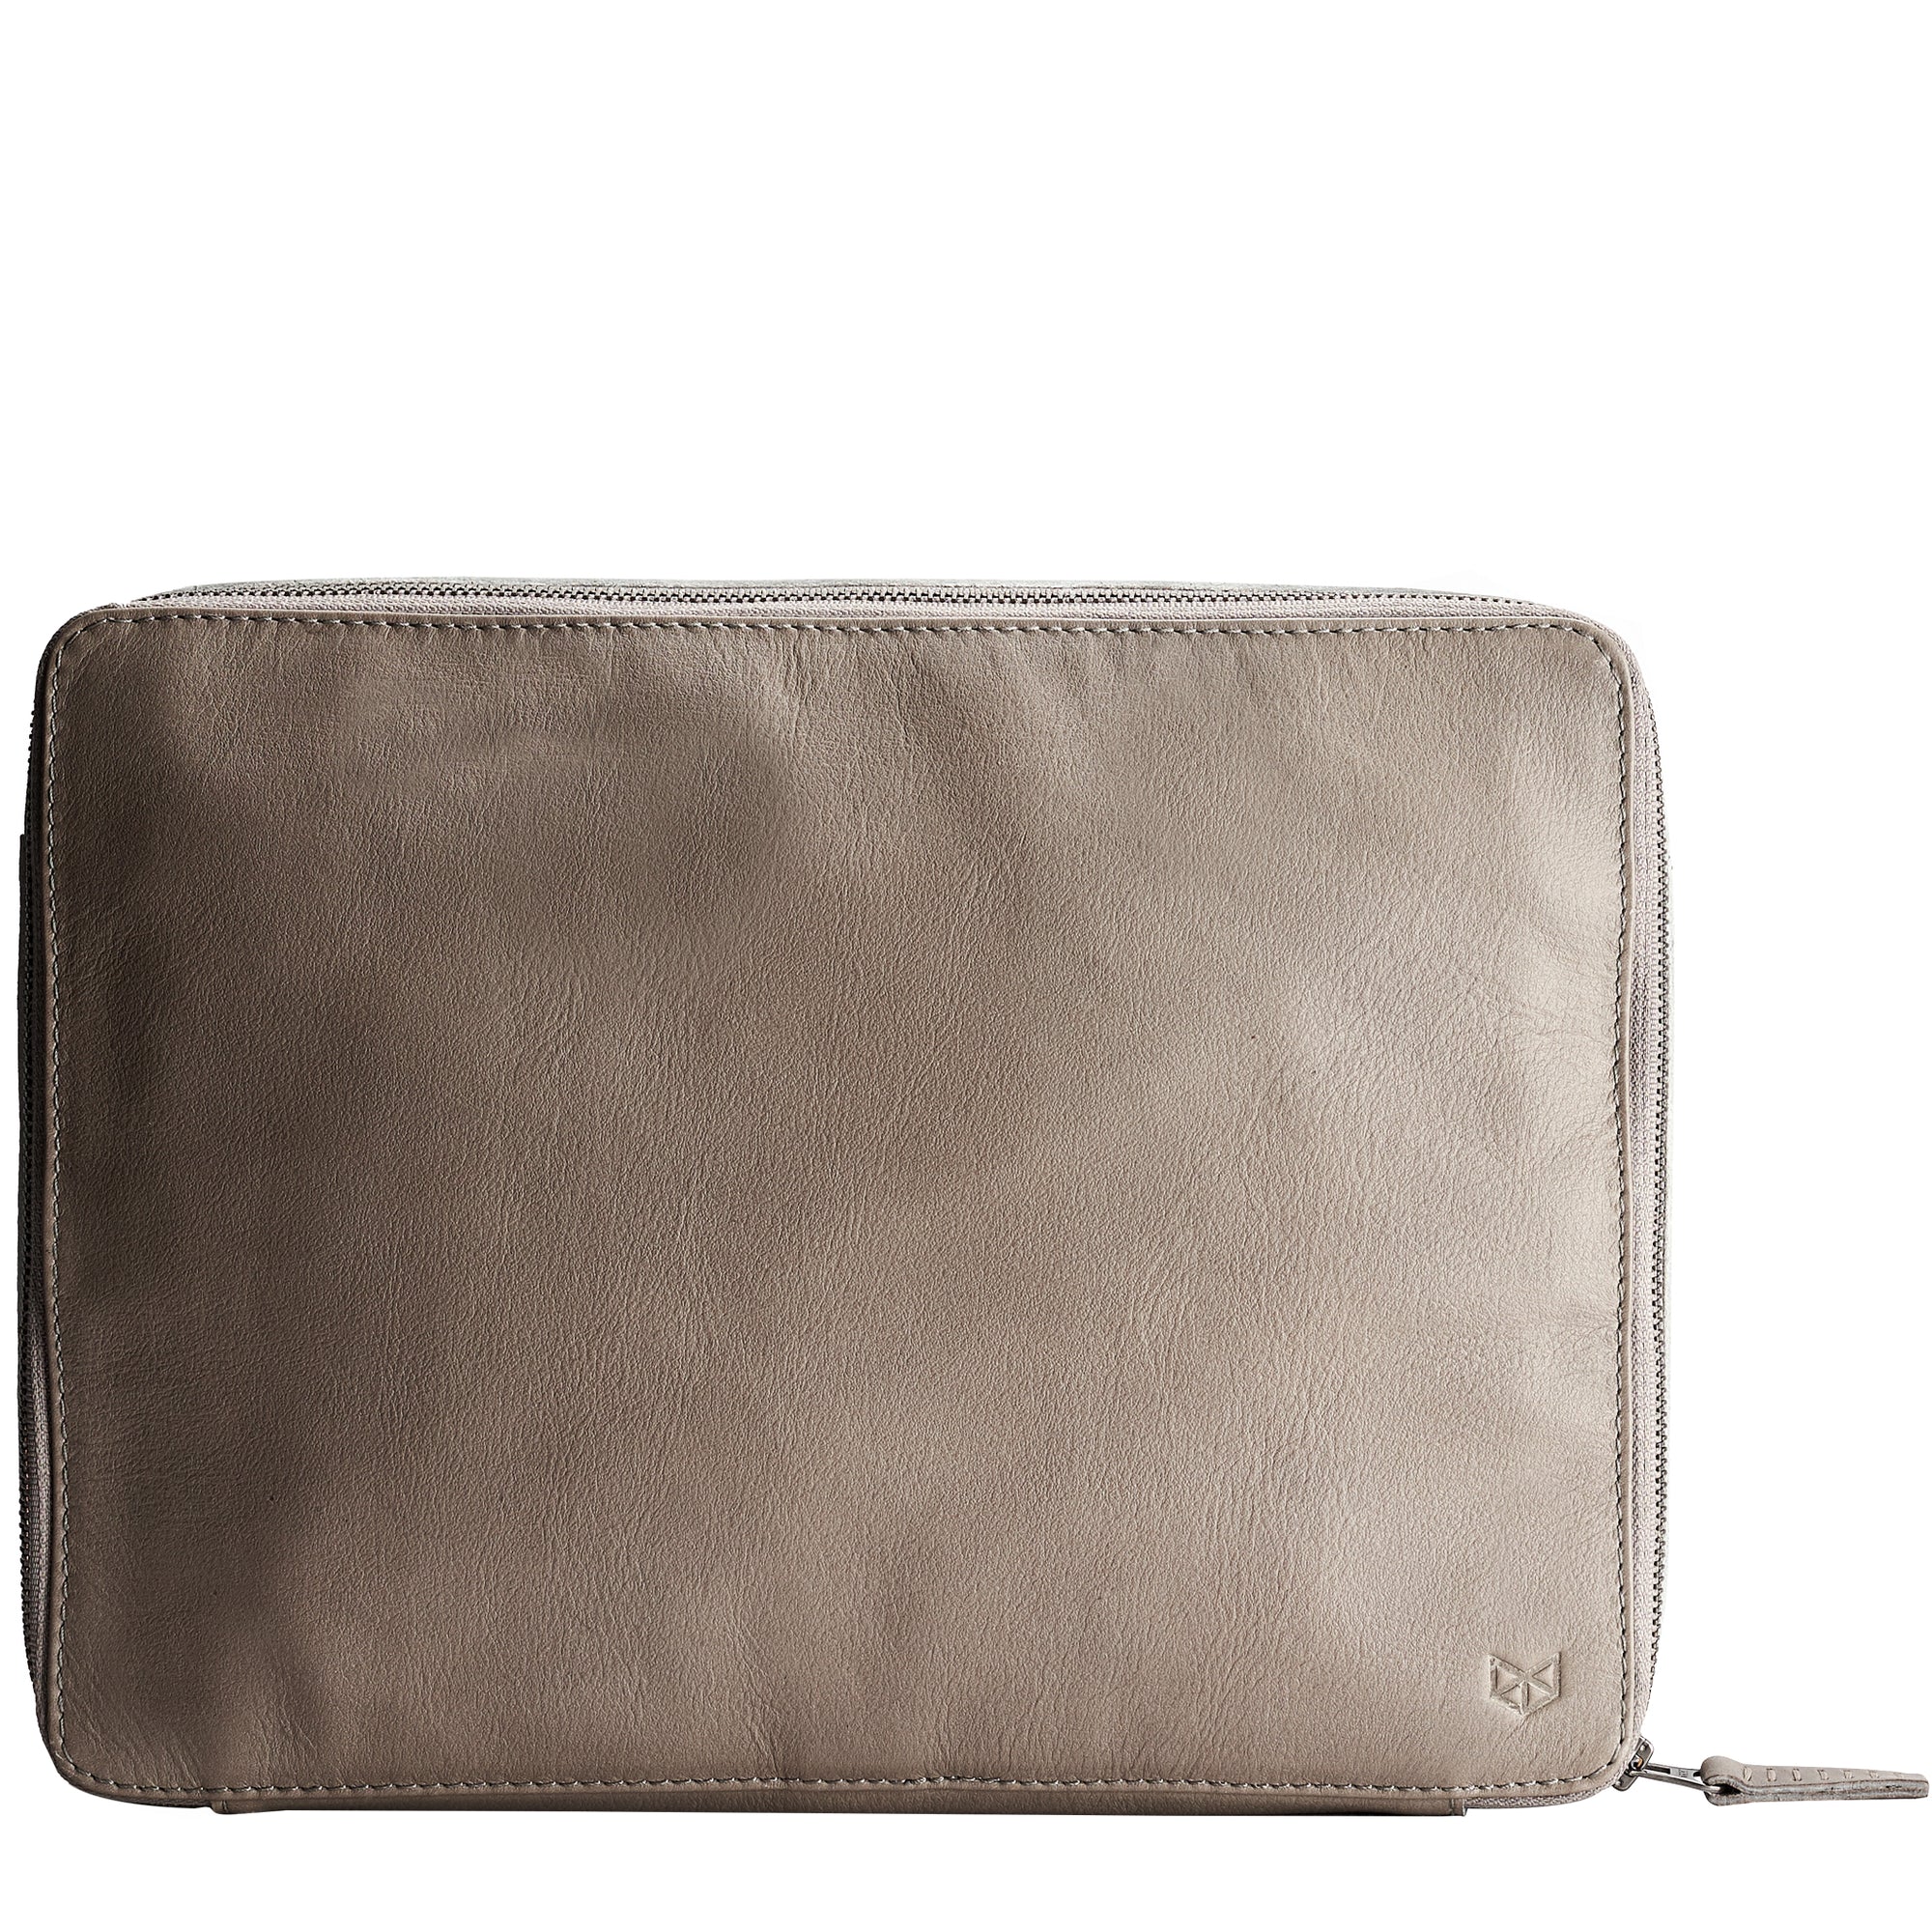 EDC laptop bag with leather interior. Best tech pouch grey by Capra Leather